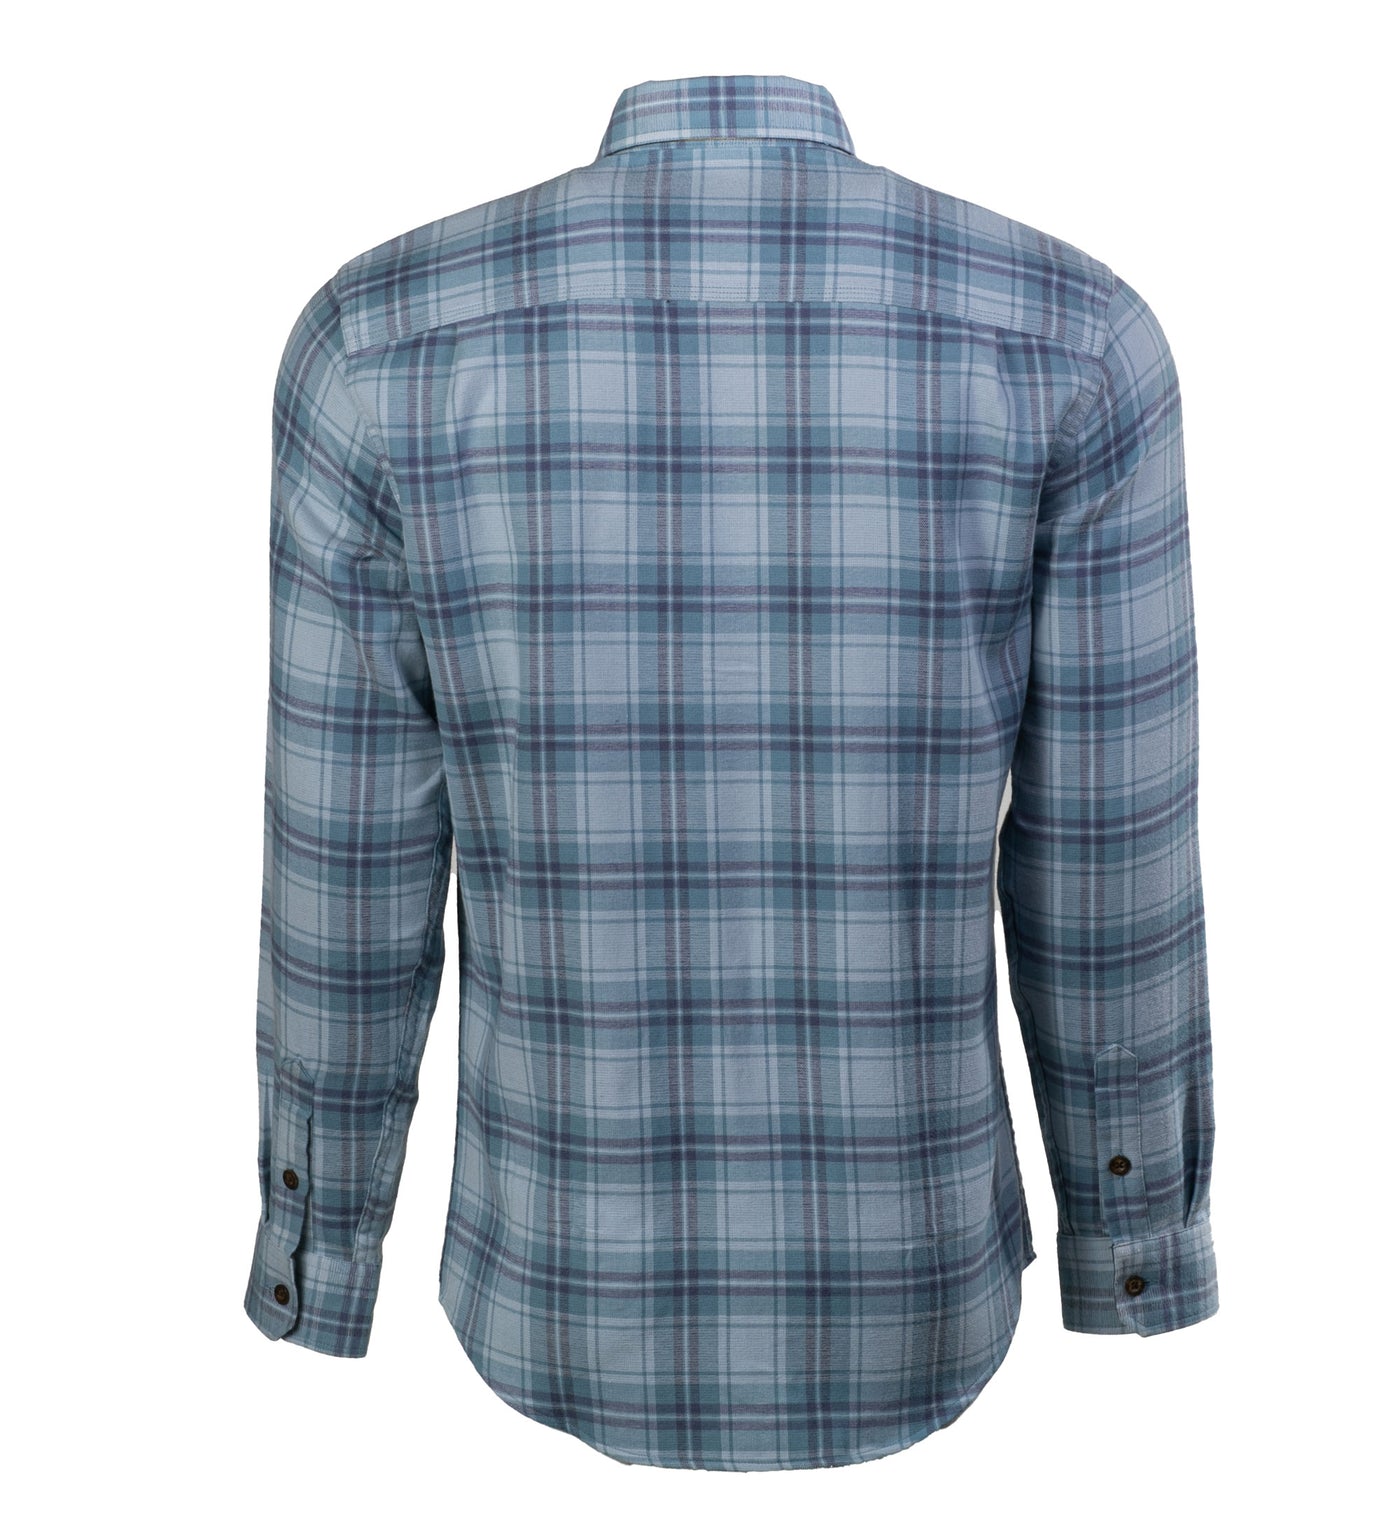 Men's Elli Every Day Double Weave Shirt- Foggy Blue